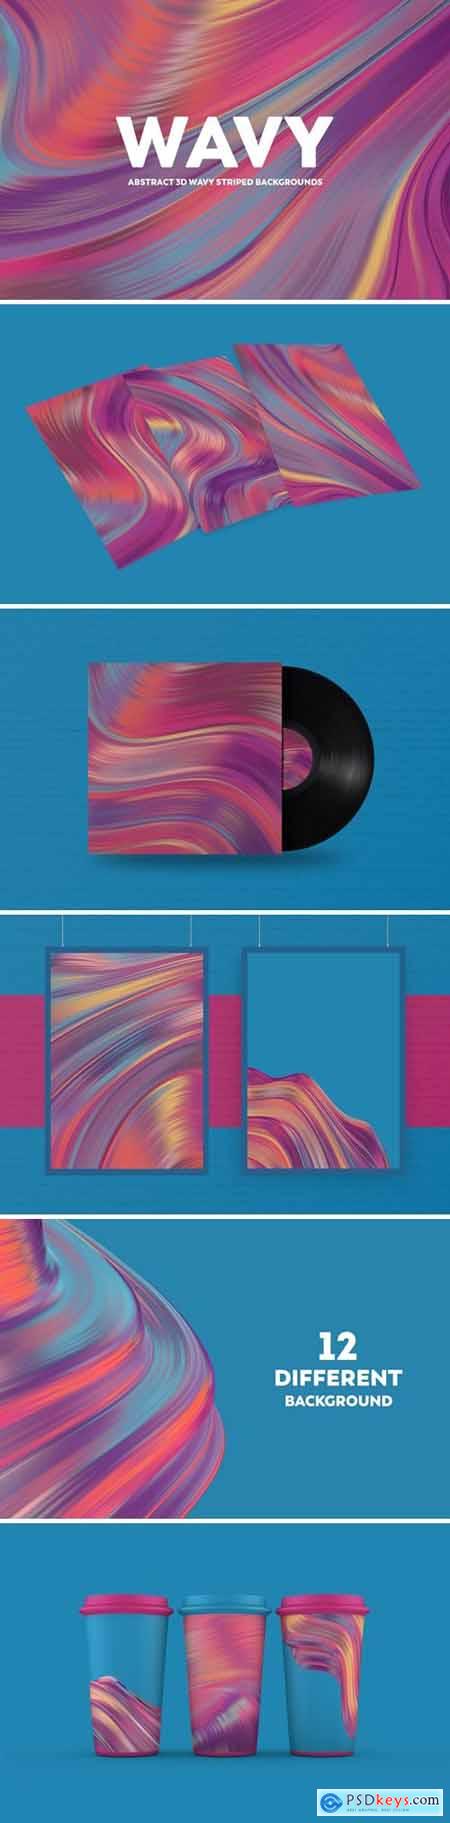 Abstract 3D Wavy Striped Backgrounds - Colorful